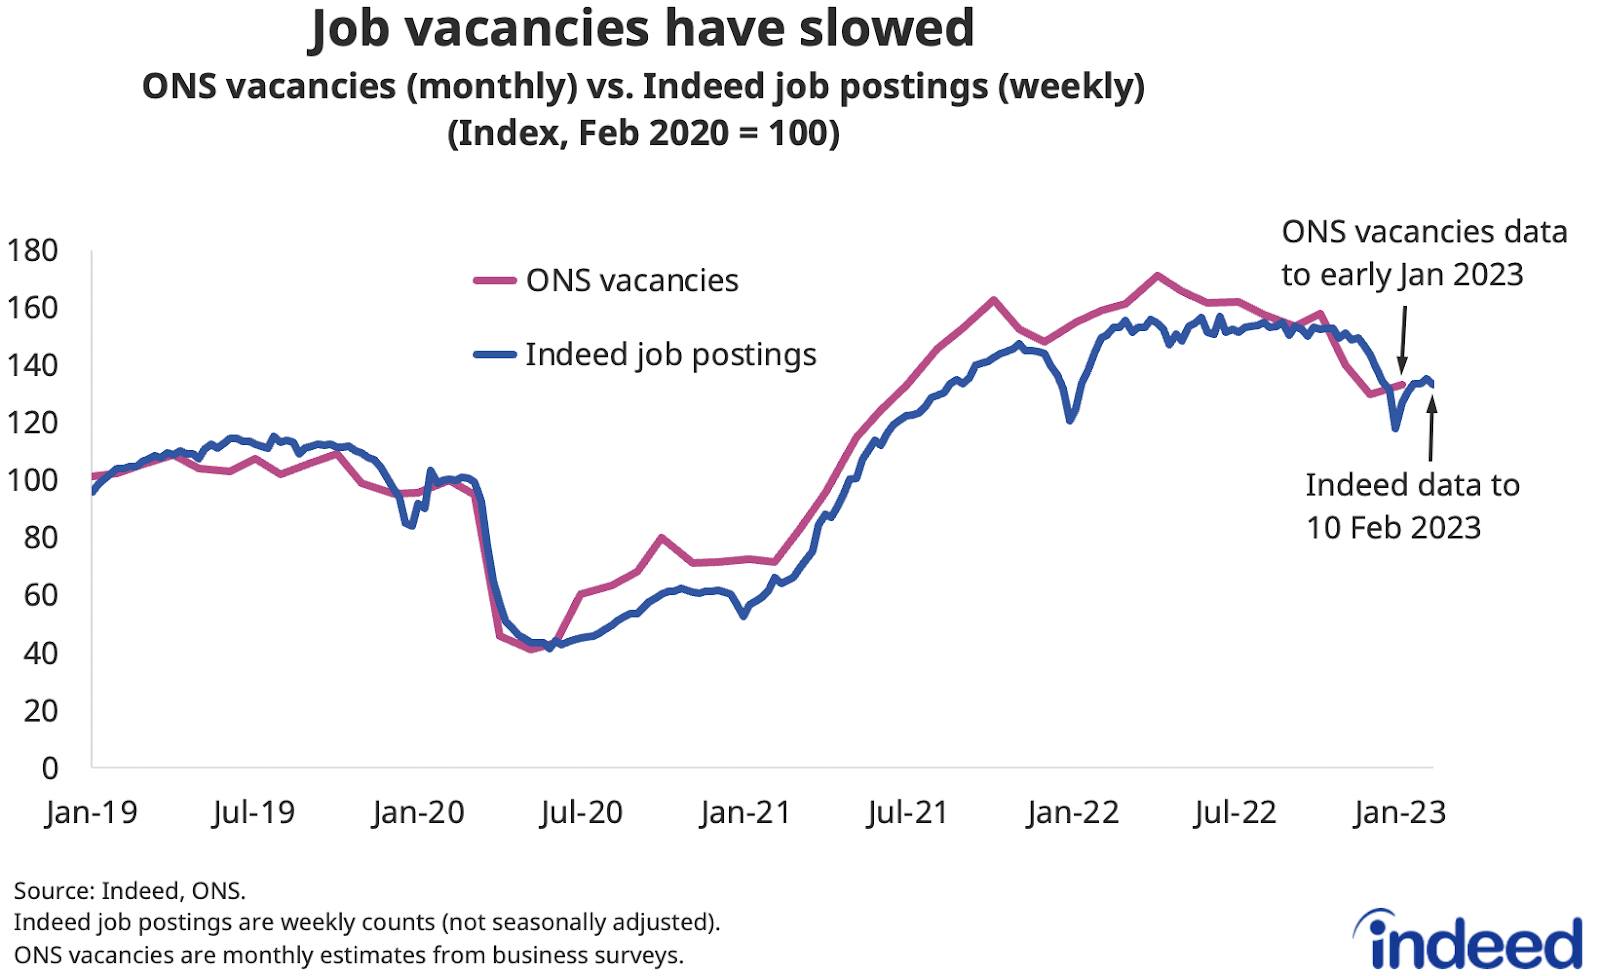 A line graph titled “Job vacancies have slowed” showing the trends in ONS vacancies and Indeed job postings between January 2019 and February 2023. Both measures have softened from recent peaks but remain well above pre-pandemic levels. 